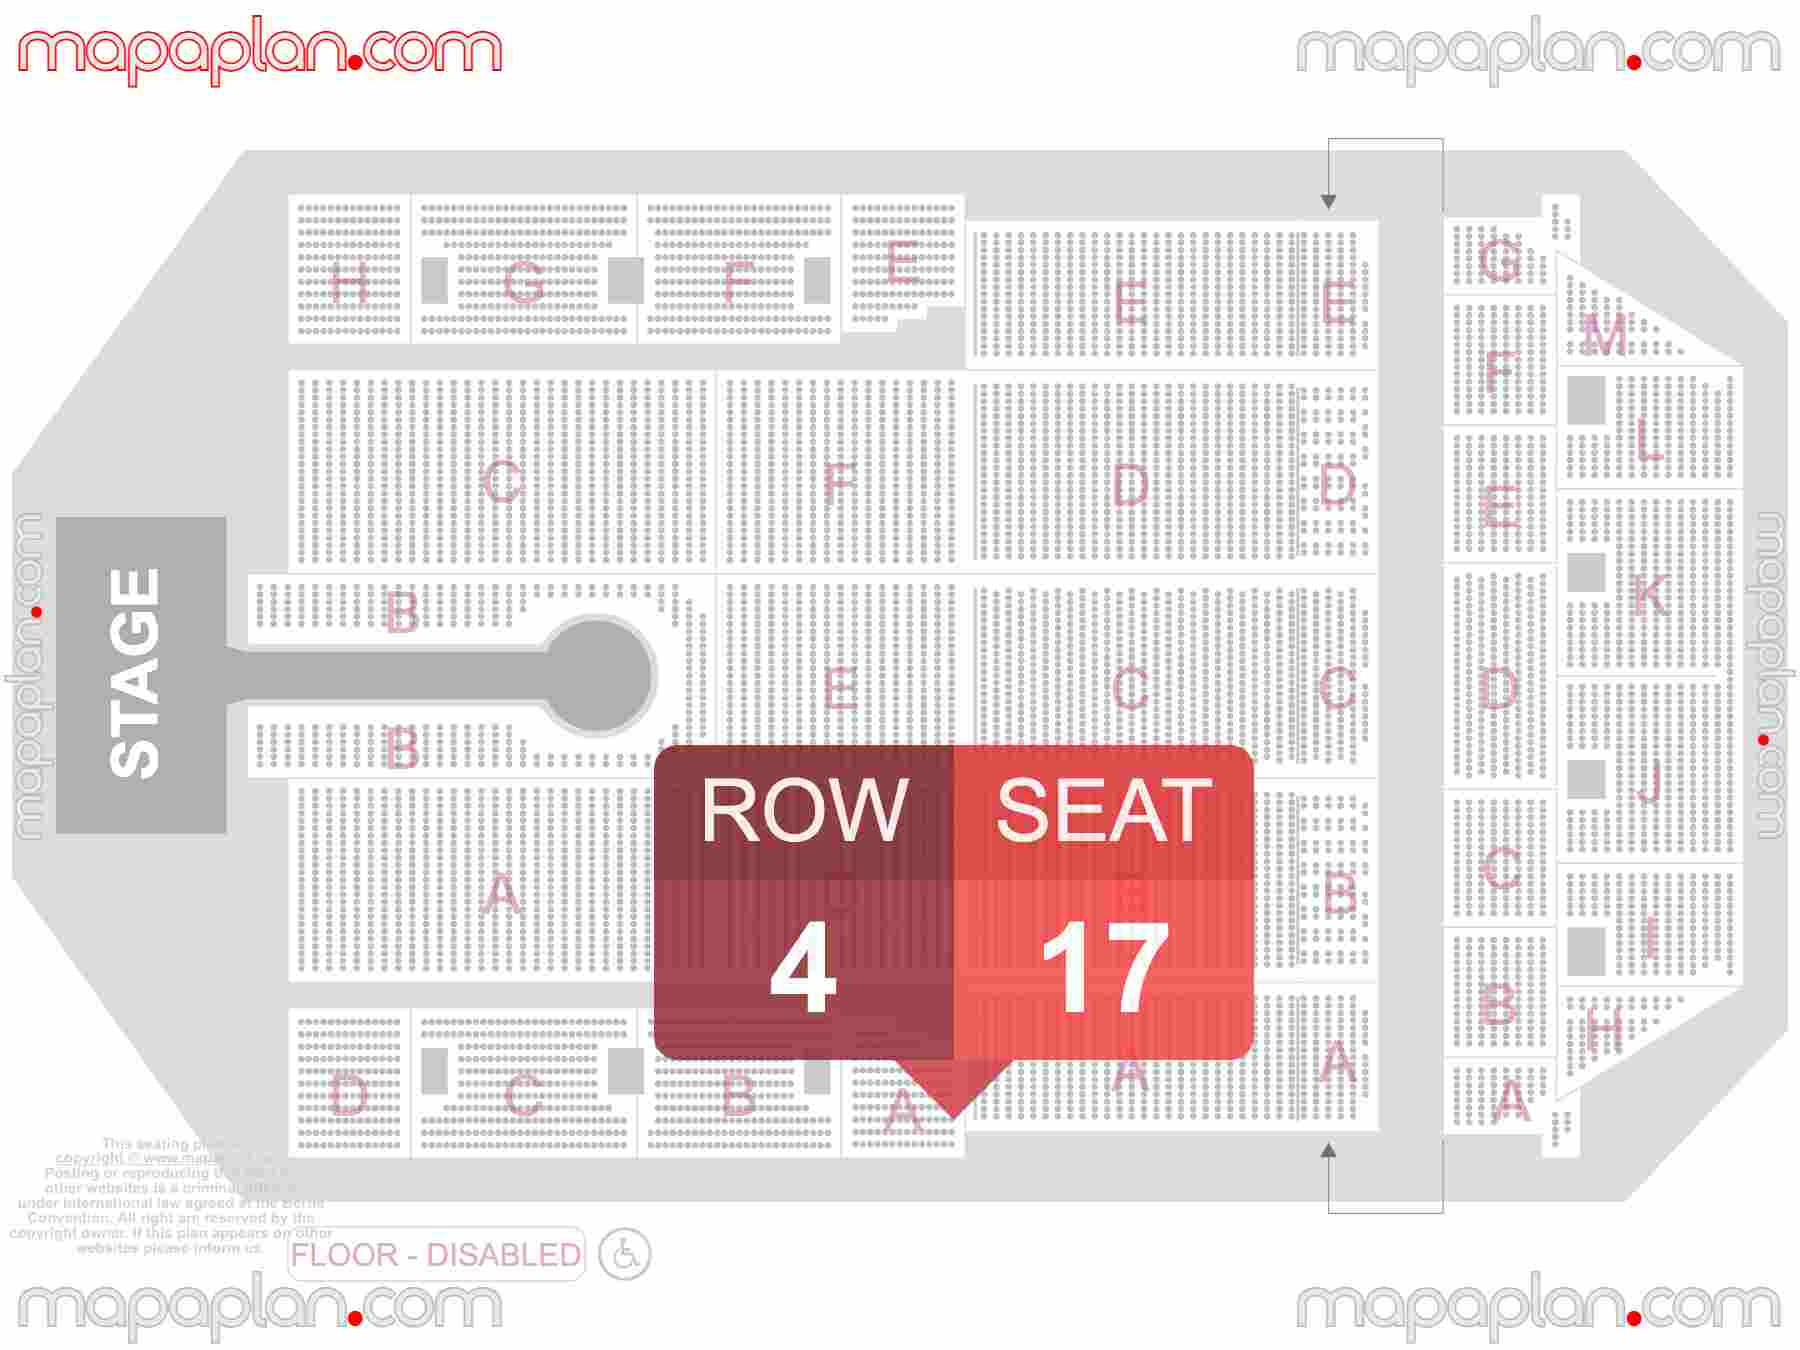 Brussels ING Arena seating plan Concert with extended catwalk stage  Verdeling zitplaatsen en staanplaatsen plaatsen zaalplan indeling met stoelnummers - seating plan with exact section numbers showing best rows and seats selection 3d layout - Best interactive seat finder tool with precise detailed location data